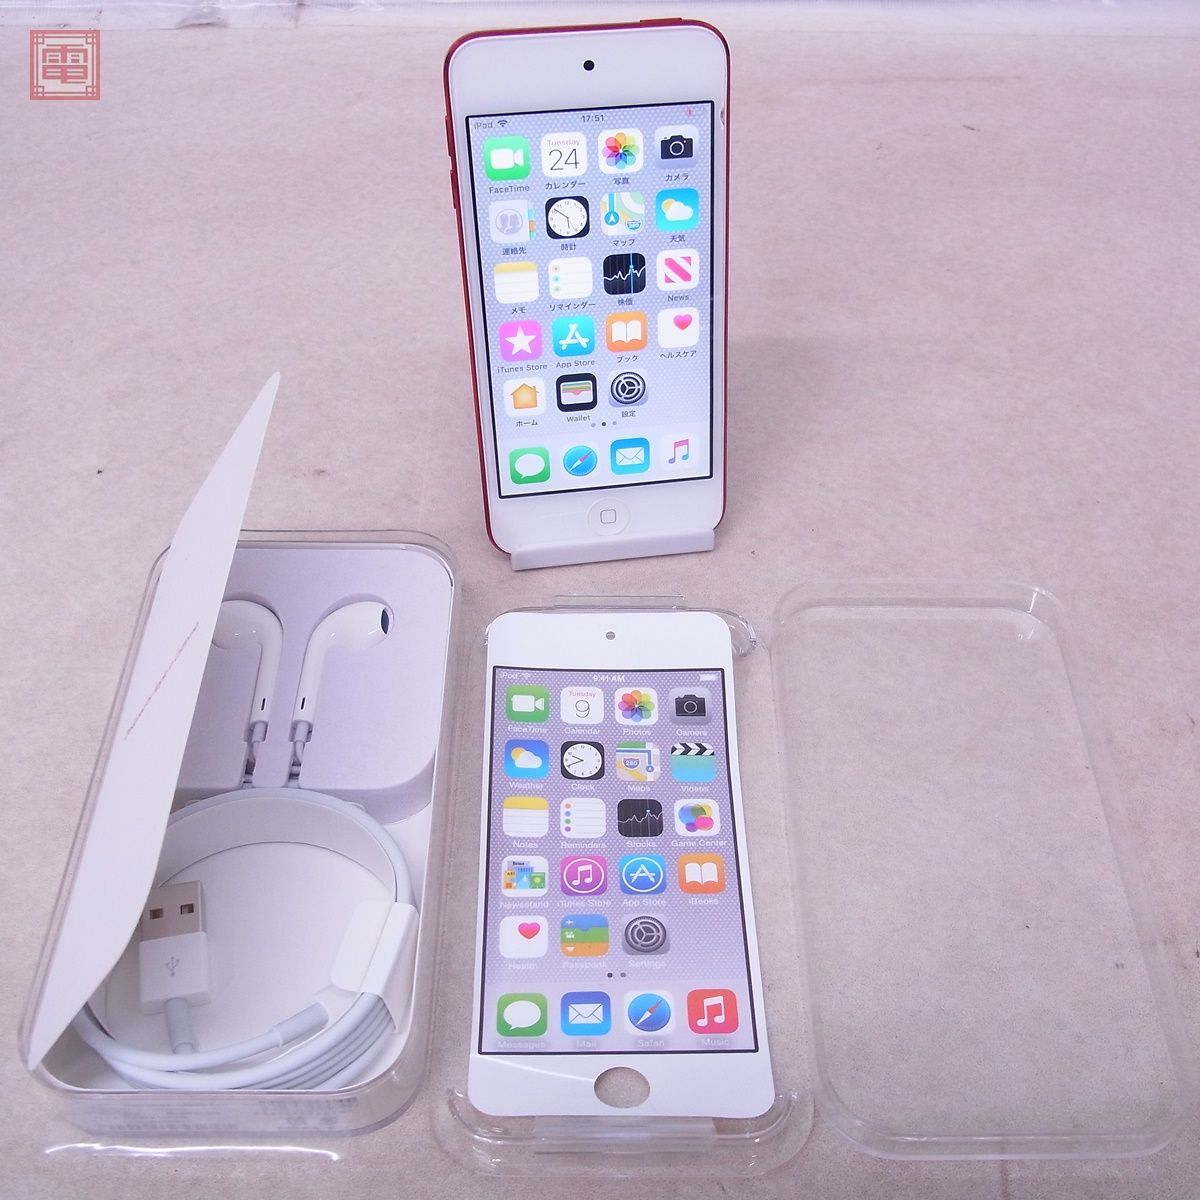 Apple iPod touch 第6世代 128GB プロダクトレッド A1574 MKWW2J/A Wi